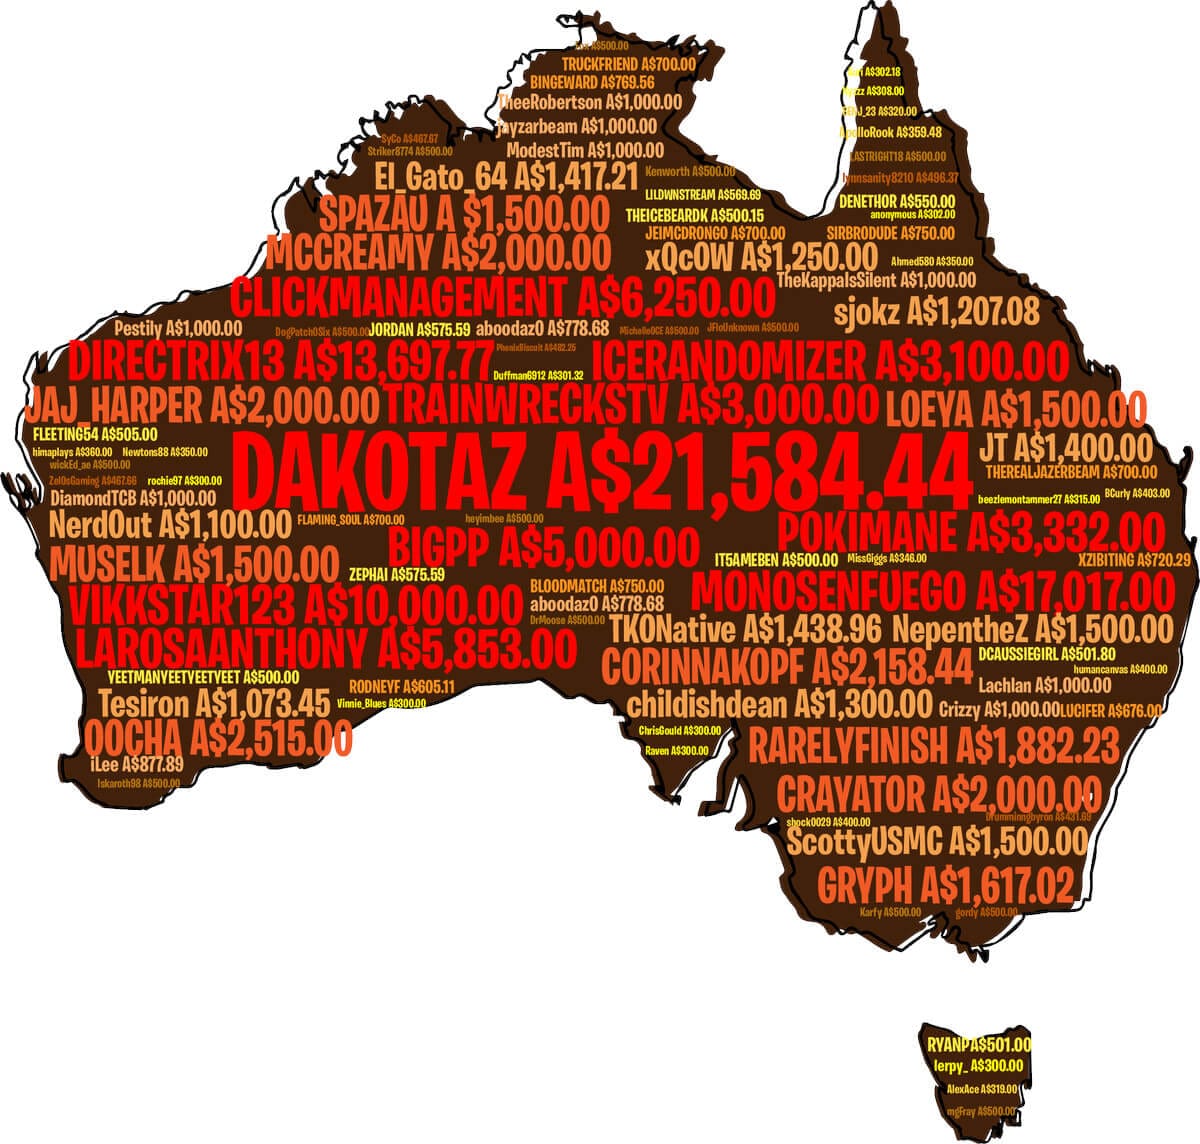 Australia wildfire donation graphic by Fasffy